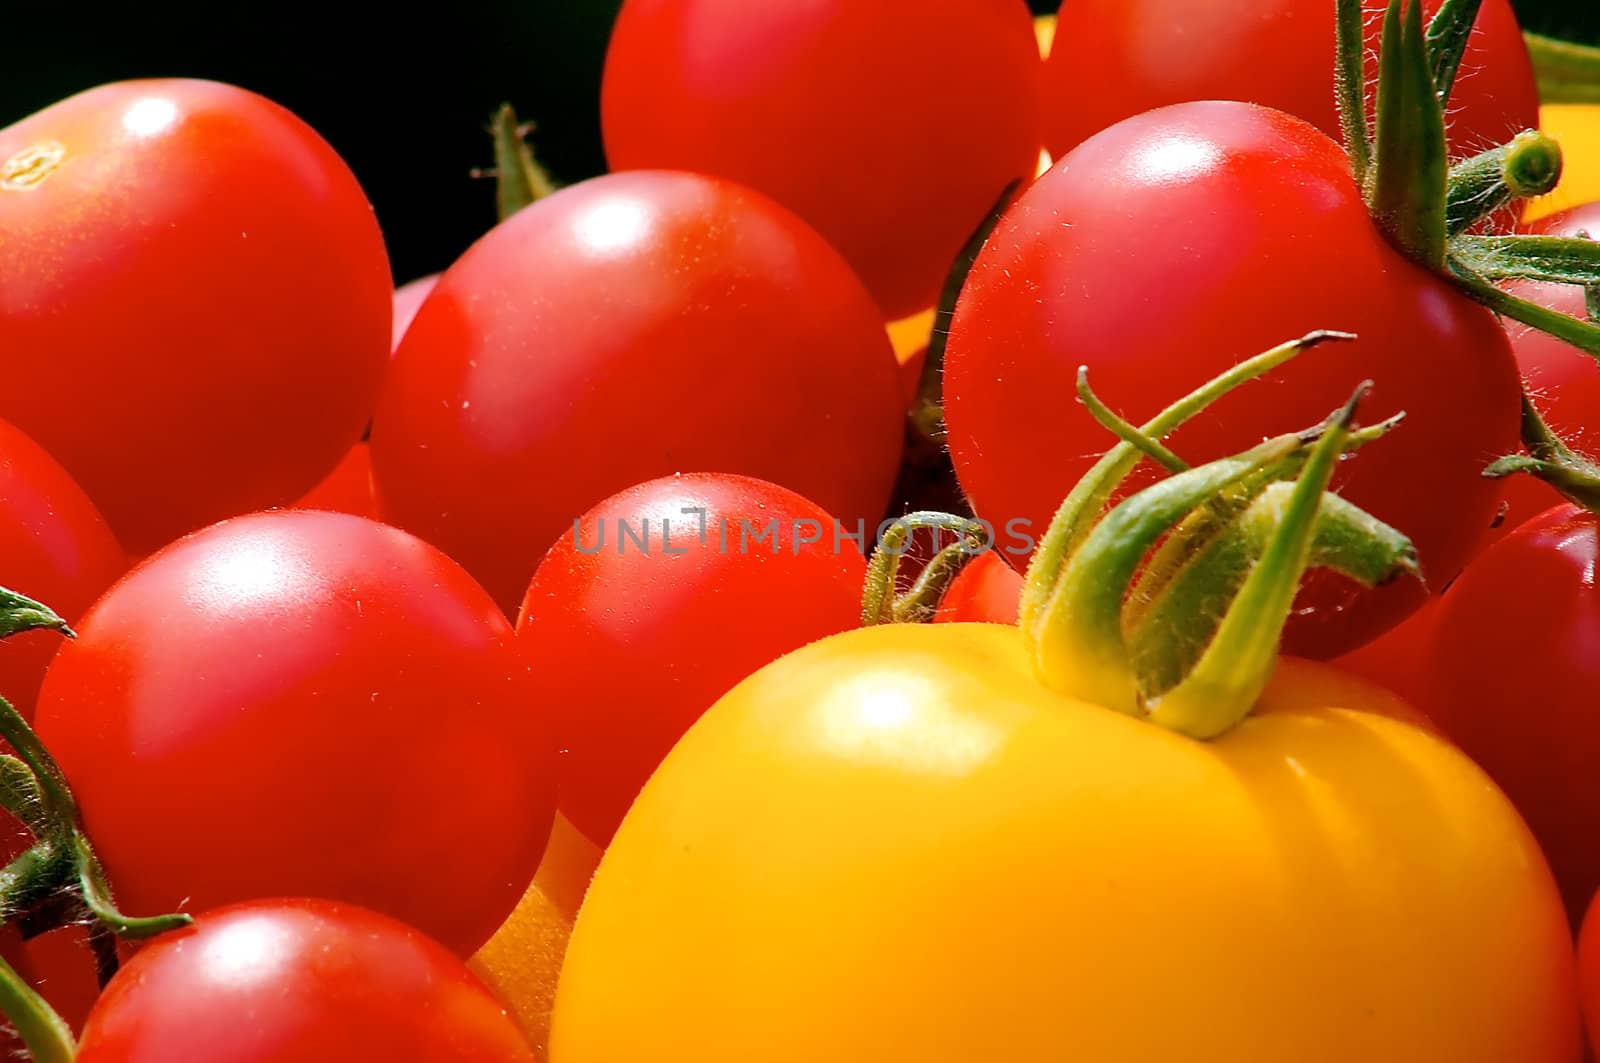 Colorful tomatoes by Talanis